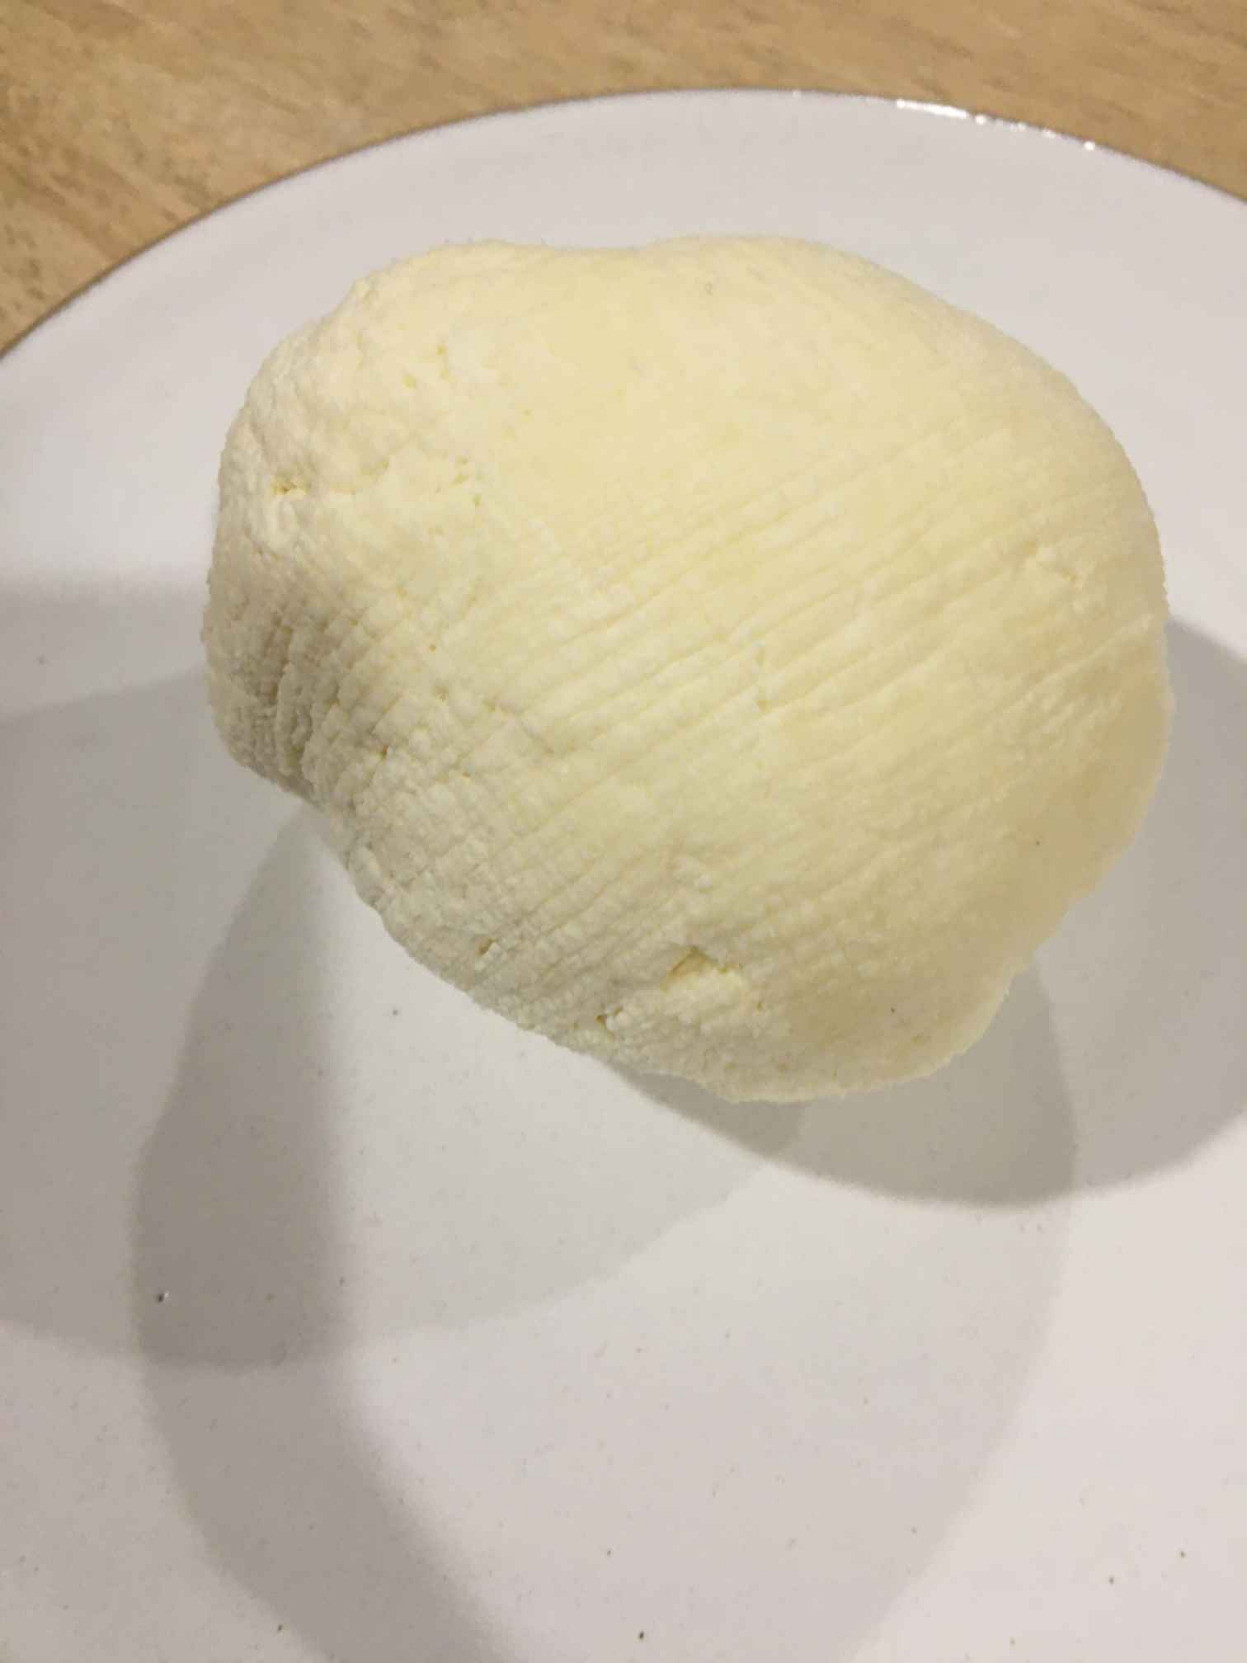 formed ball of cheese on plate